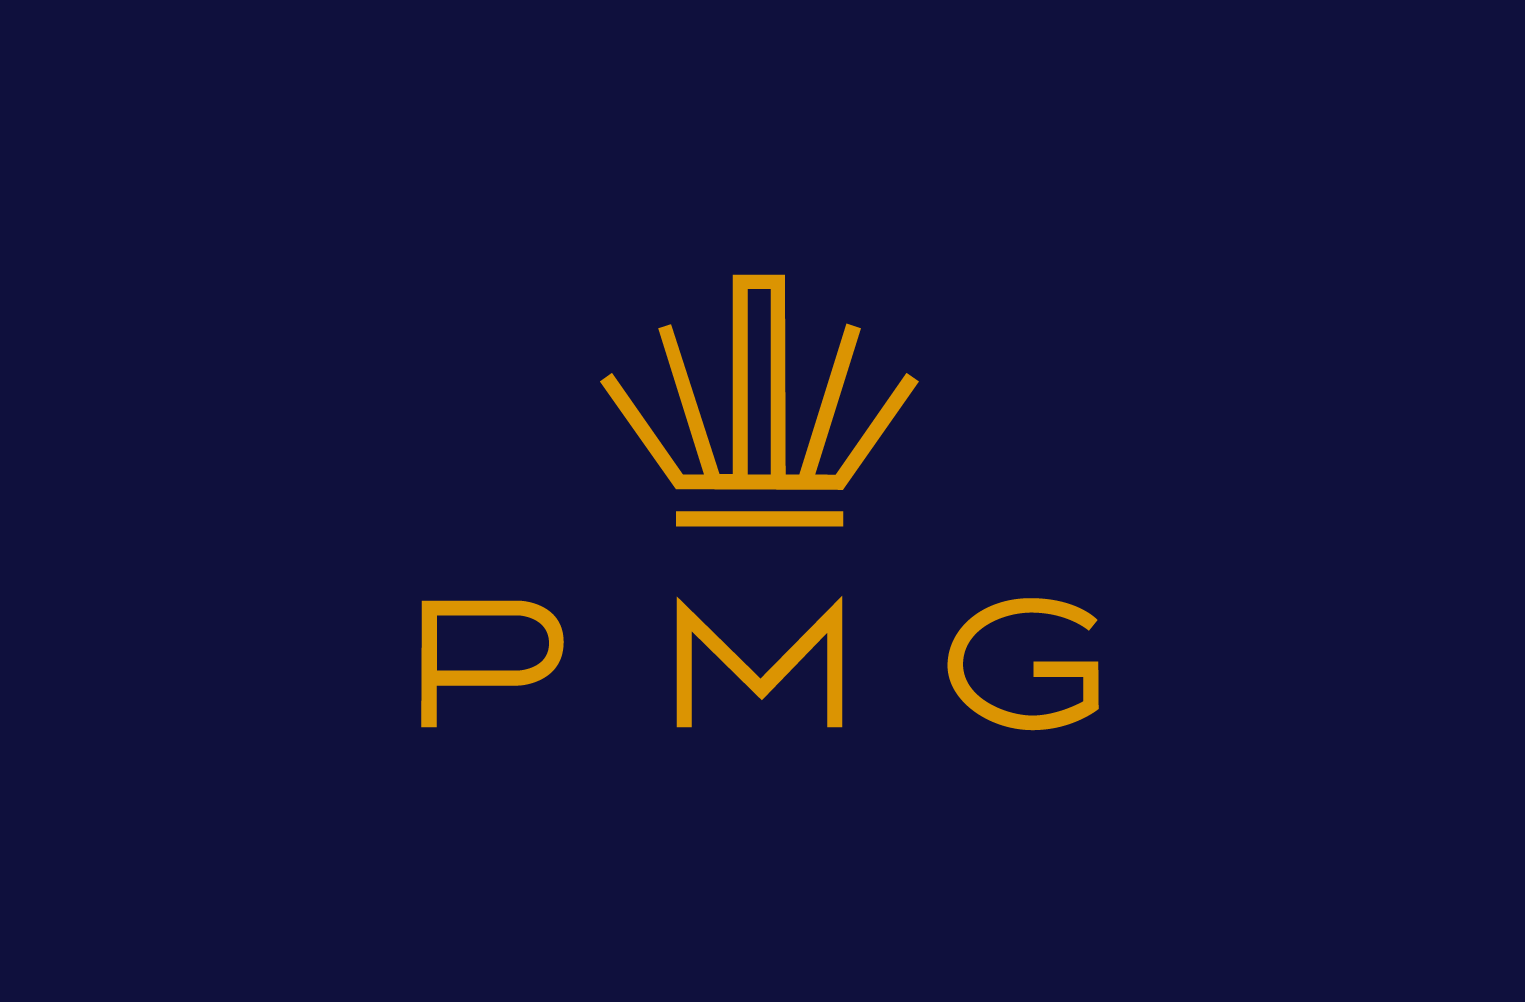 Welcome to PMG Solar harvest